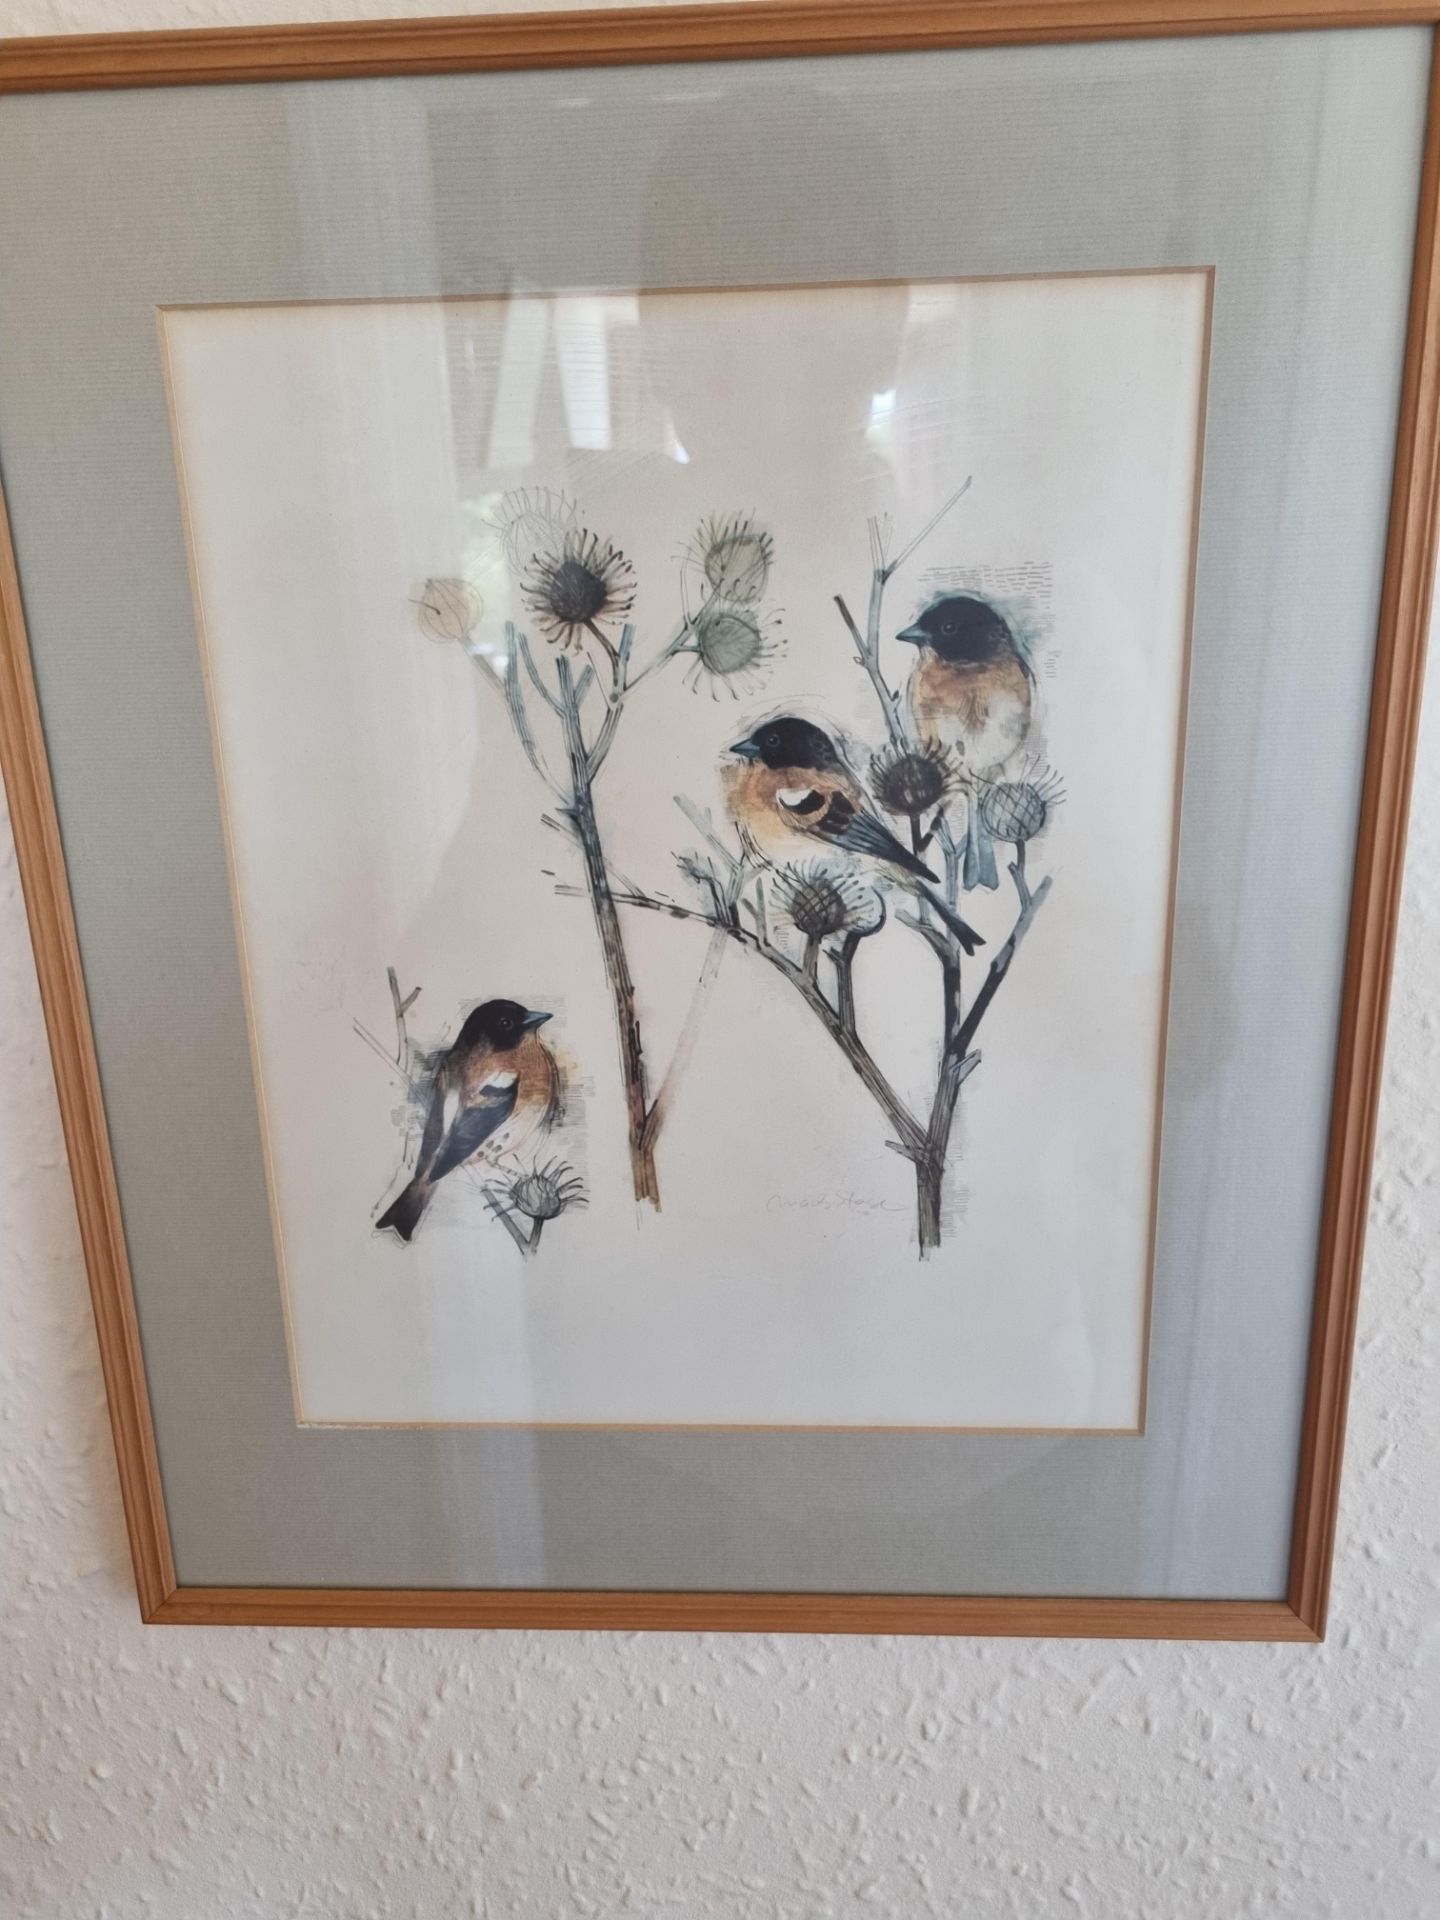 A set of 3 Framed Wall Art Bird Signed Mads Stage (Danish 6 July 1922 â€“ 28 May 2004) In Wooden